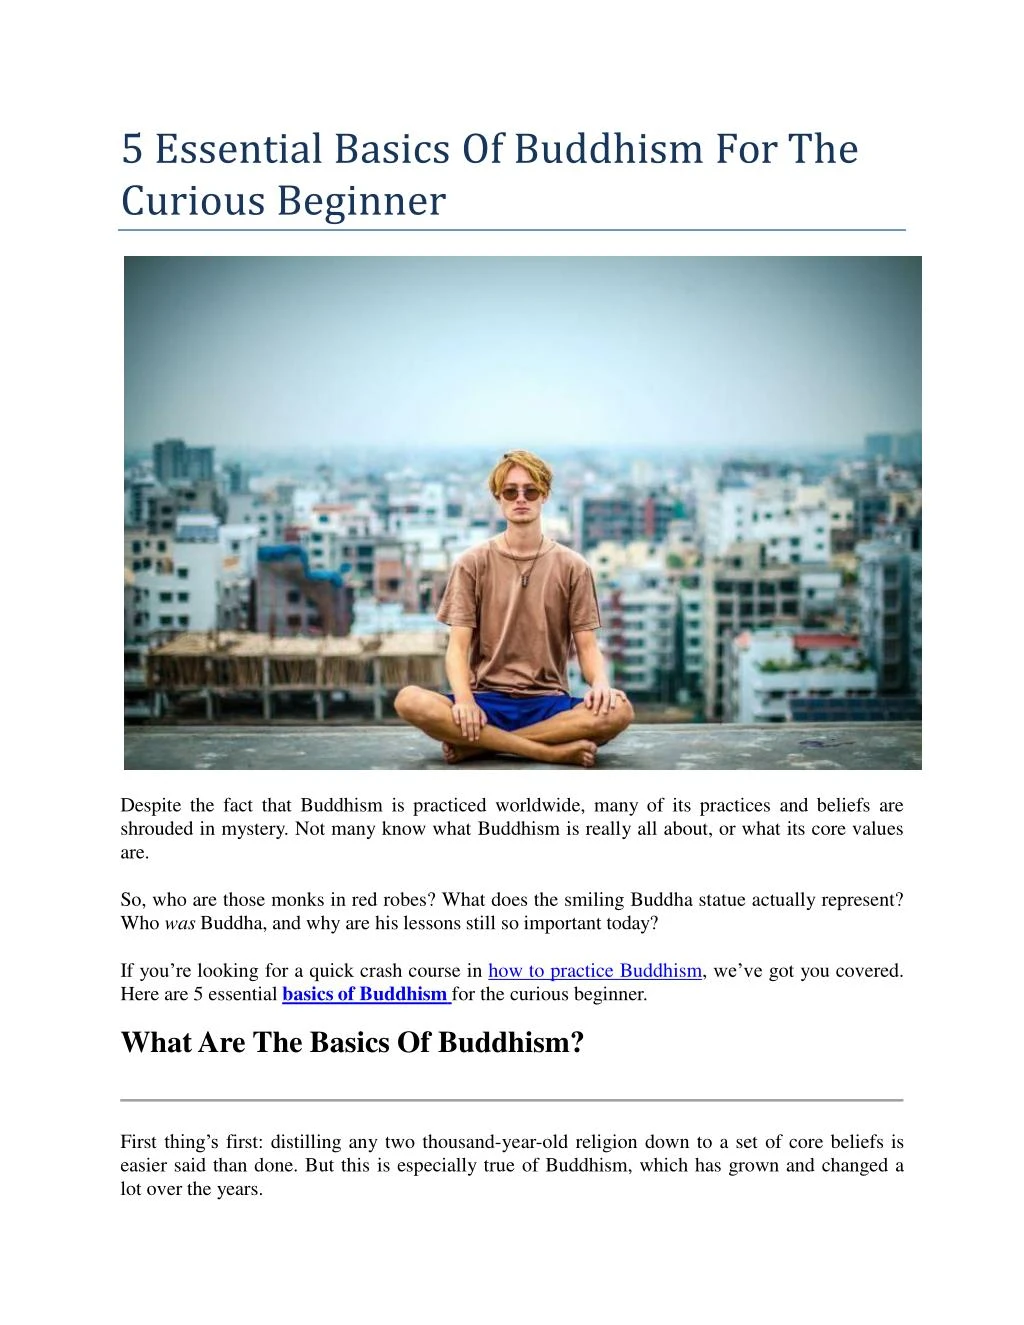 5 essential basics of buddhism for the curious beginner